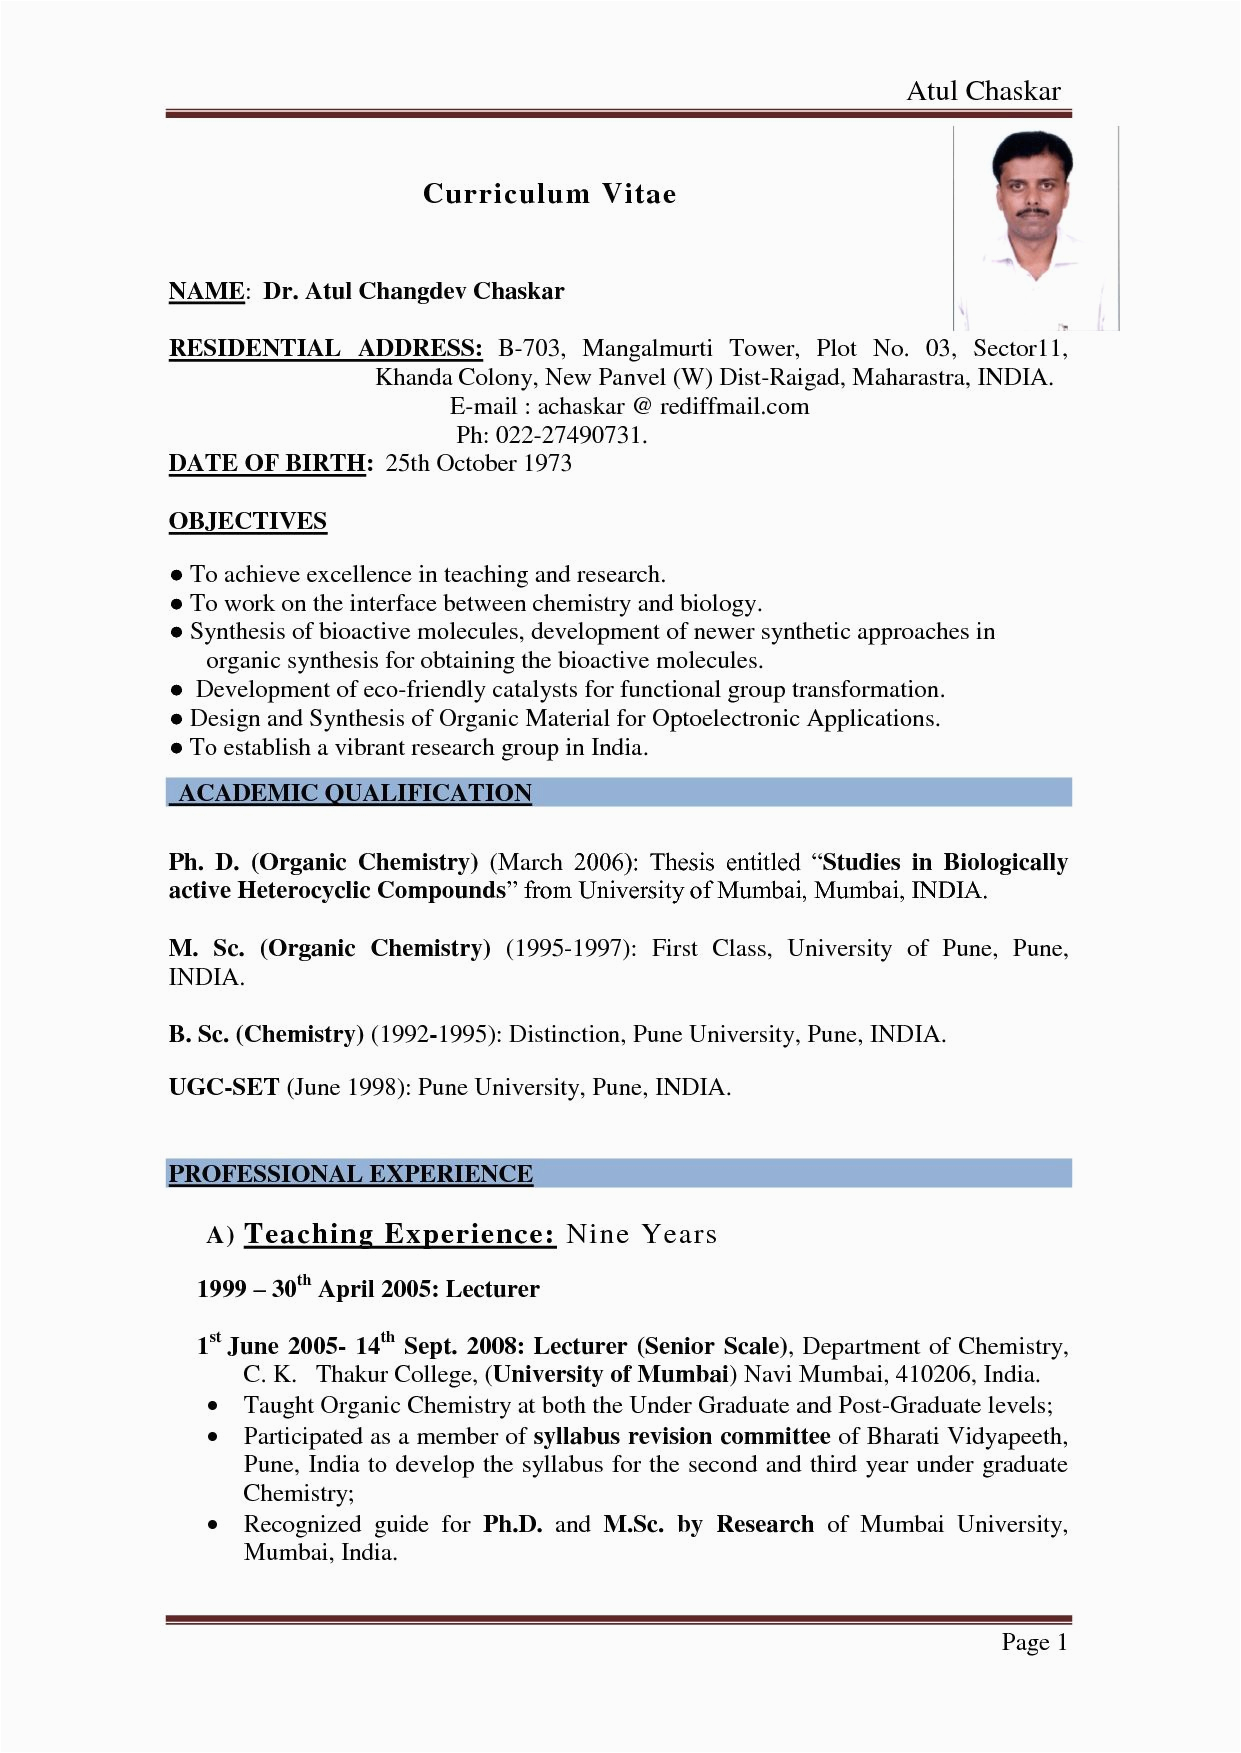 Resume Samples for College Students In India Indian Resume format Pdf Best Resume Examples